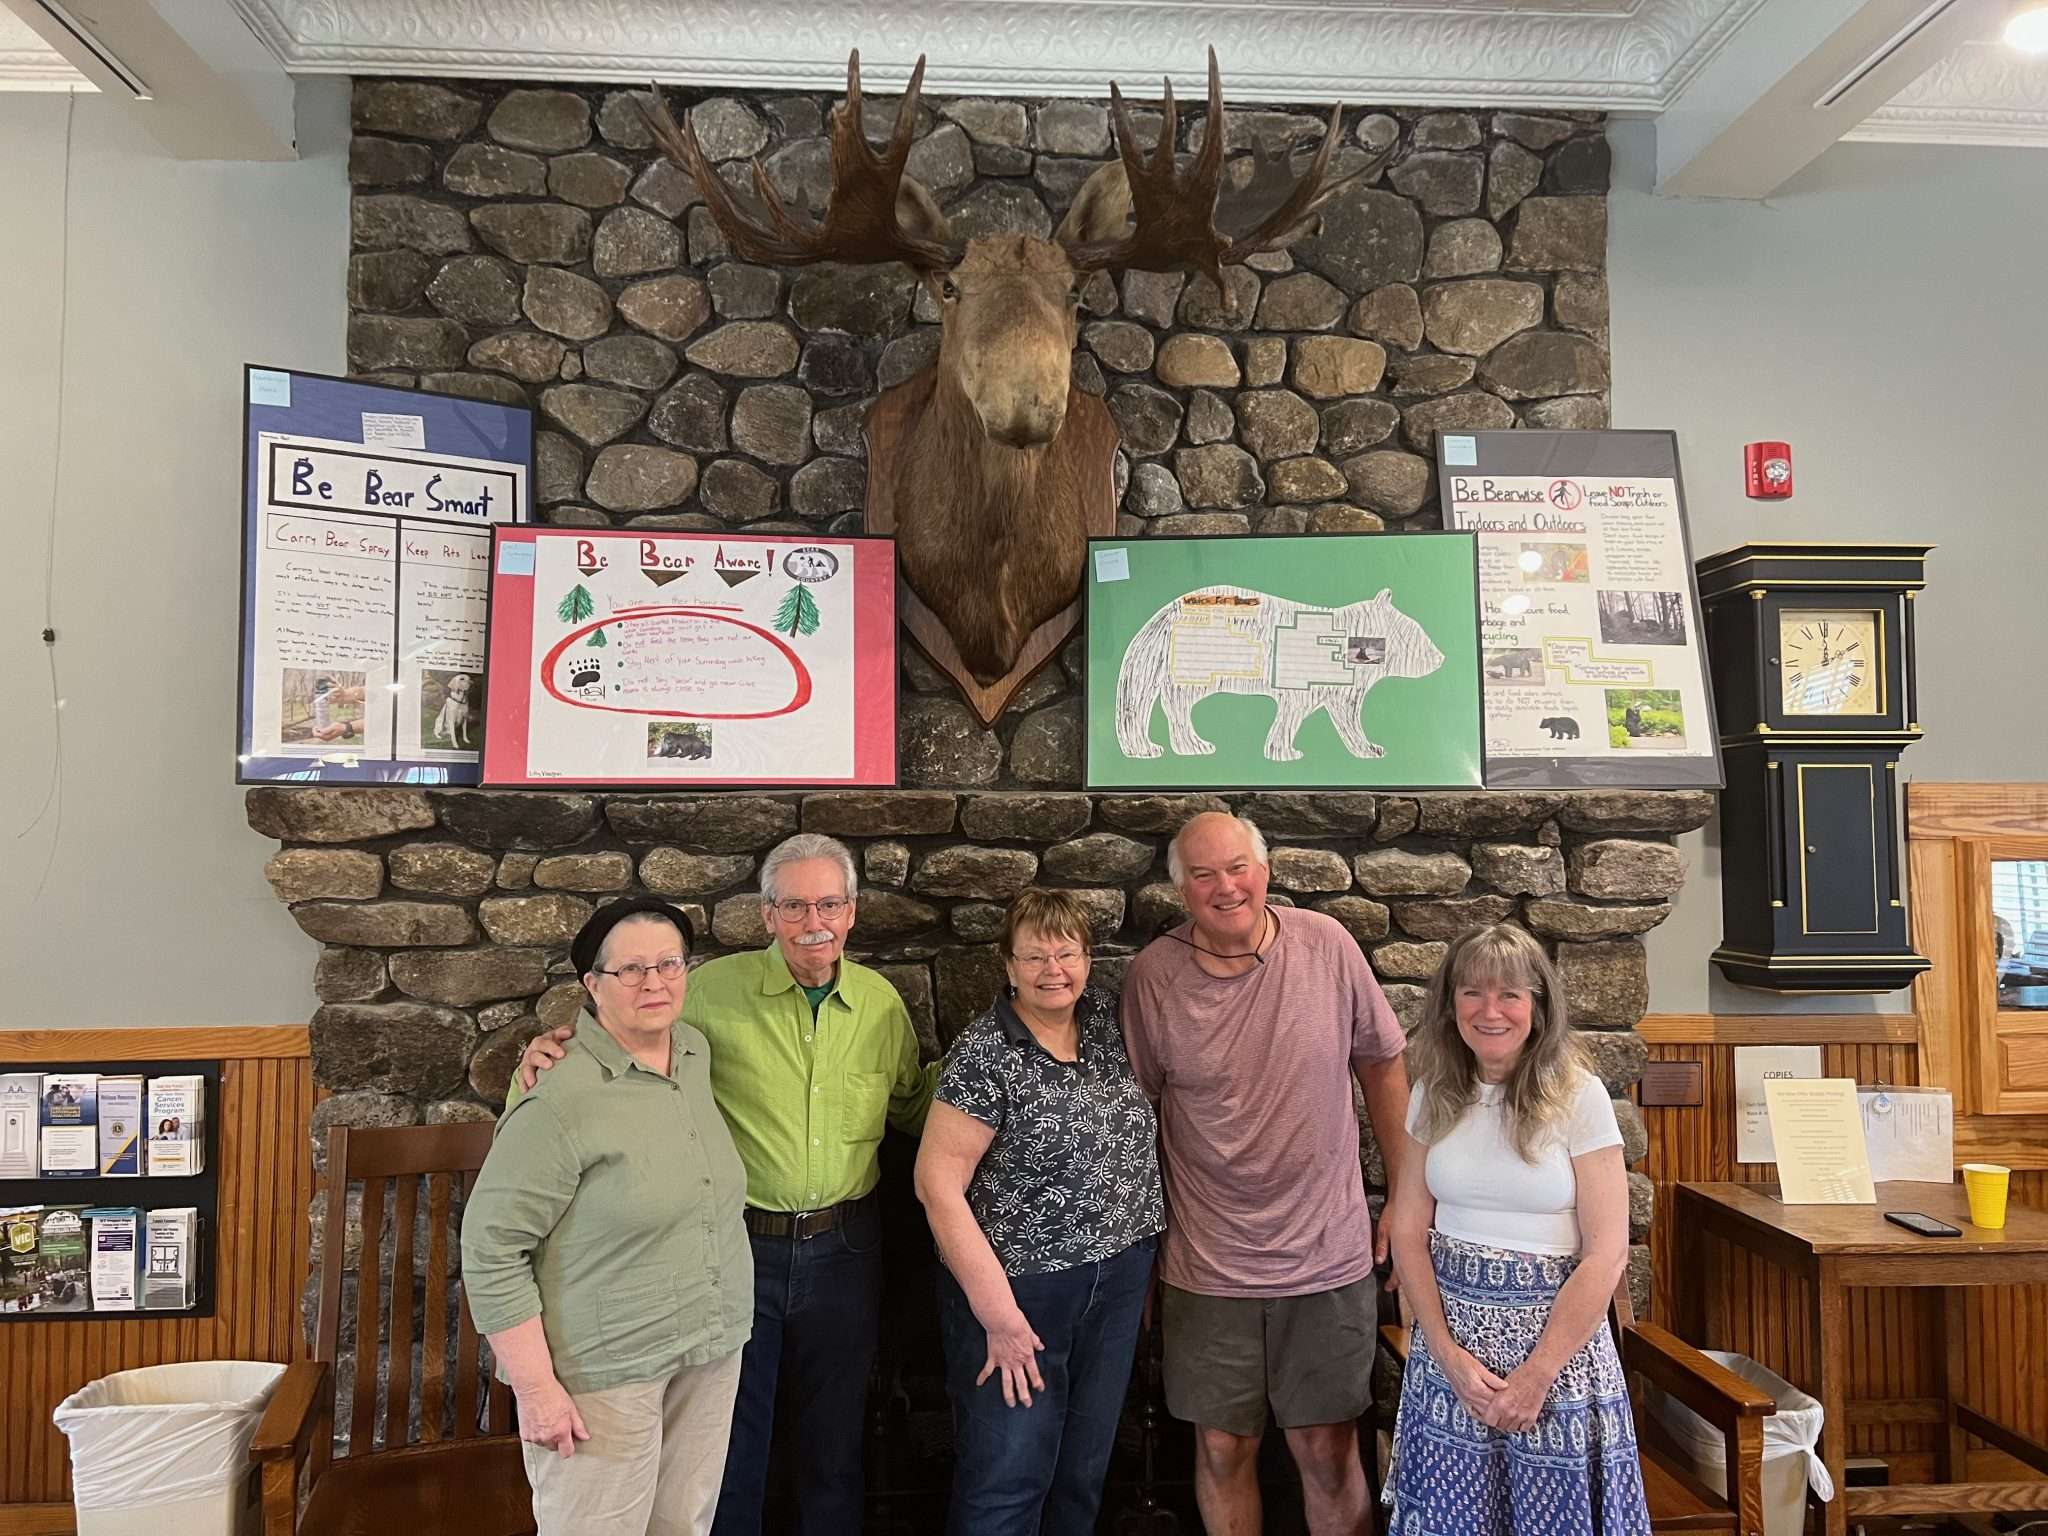 Committee members and visitors gather under the new "Protect Our Bears" posters now displayed in the Long Lake Public Library until August 18. Visitors talked bear safety and shared their own bear stories over cookies and coffee. Photo by Jak Krouse.